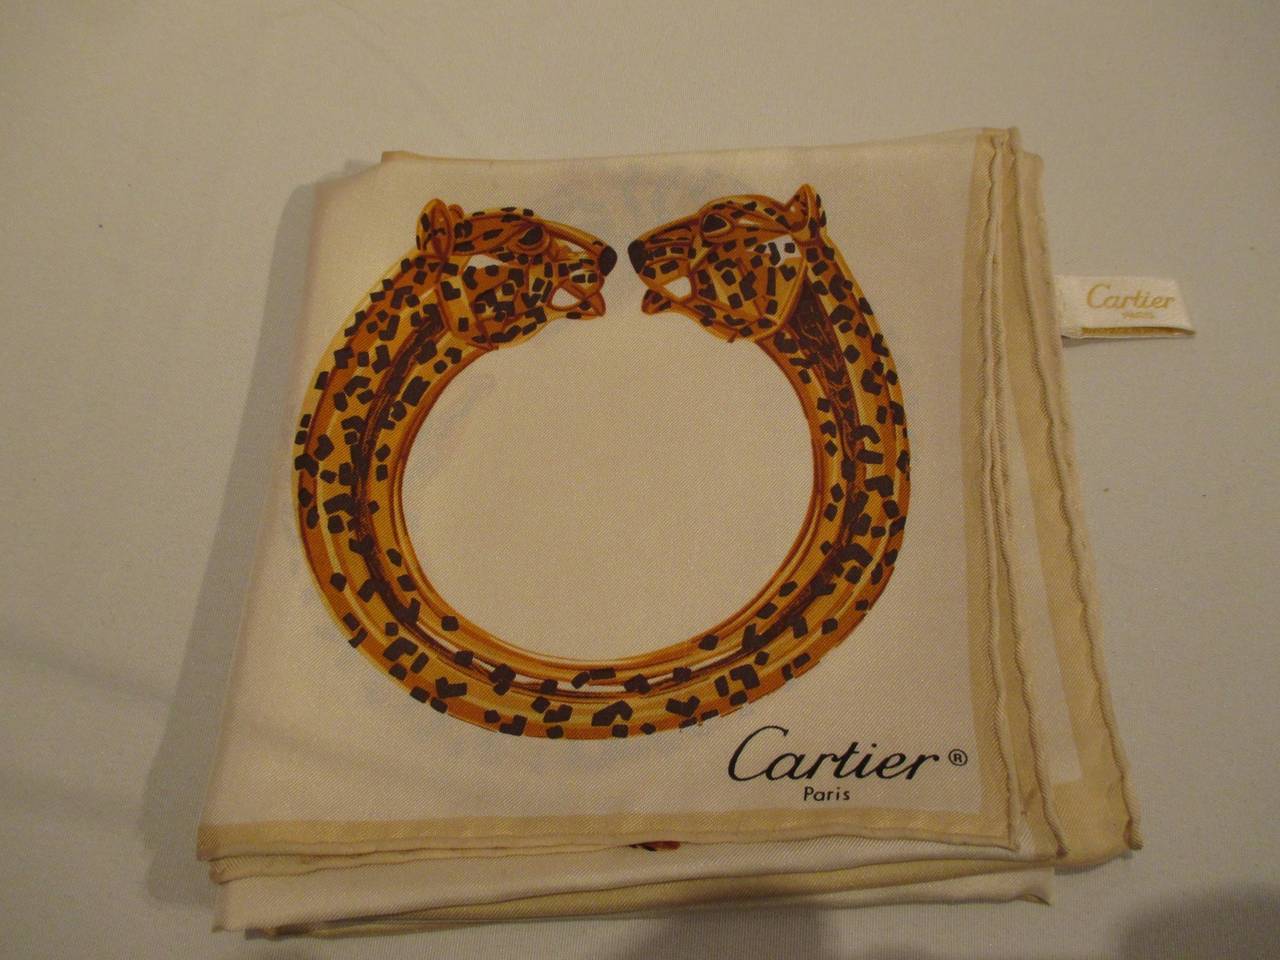 Beautiful 100% silk scarf from the house of Cartier.
sizes 64cm x 65 cm
Please note that vintage items are not new and therefore might have minor imperfections.